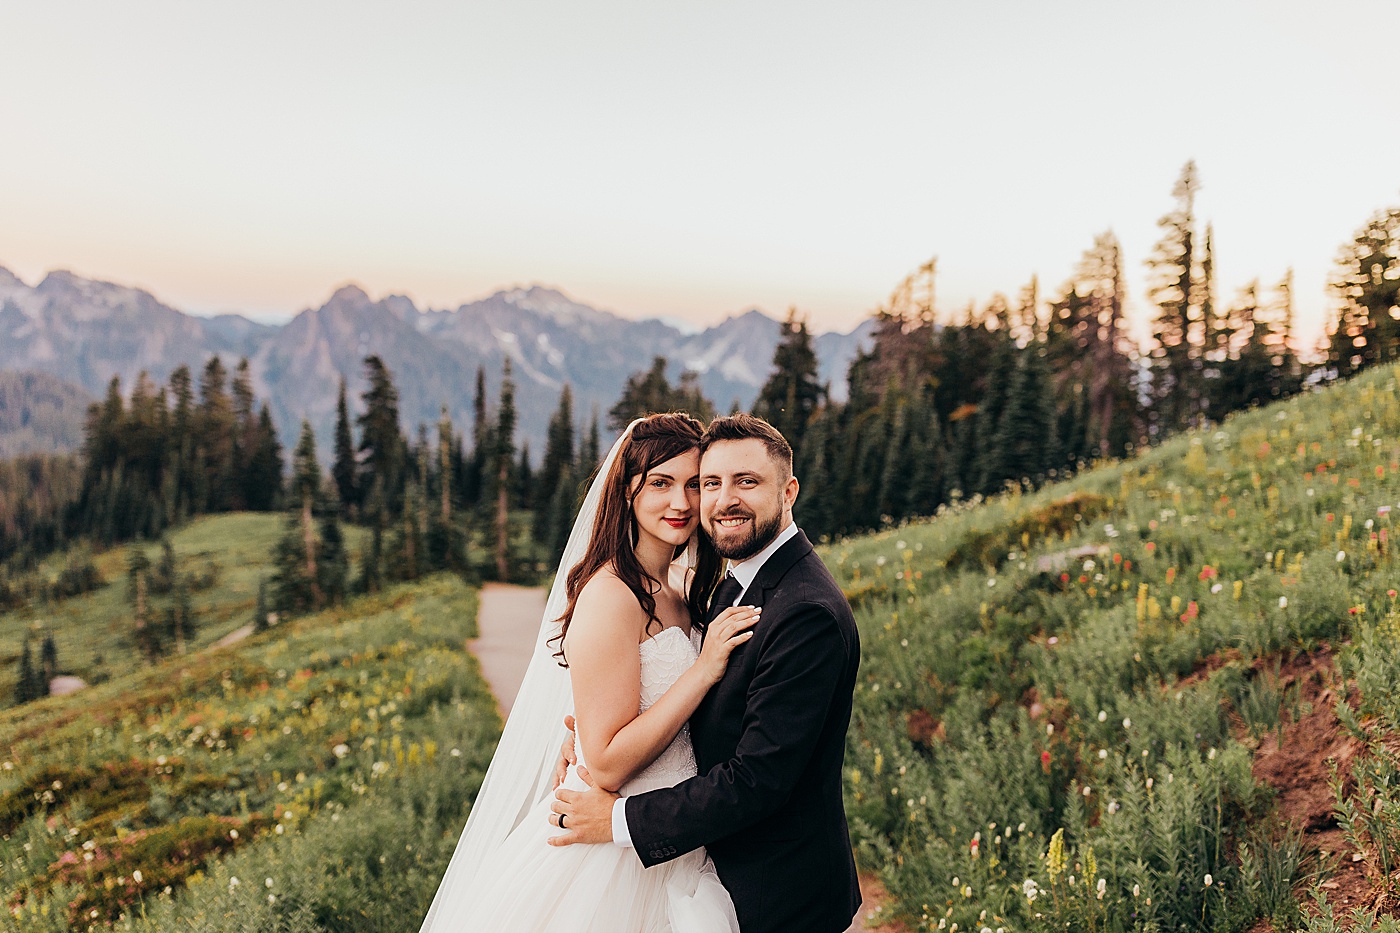 Bride and groom portraits on the Skyline Trail | Photo by Megan Montalvo Photography